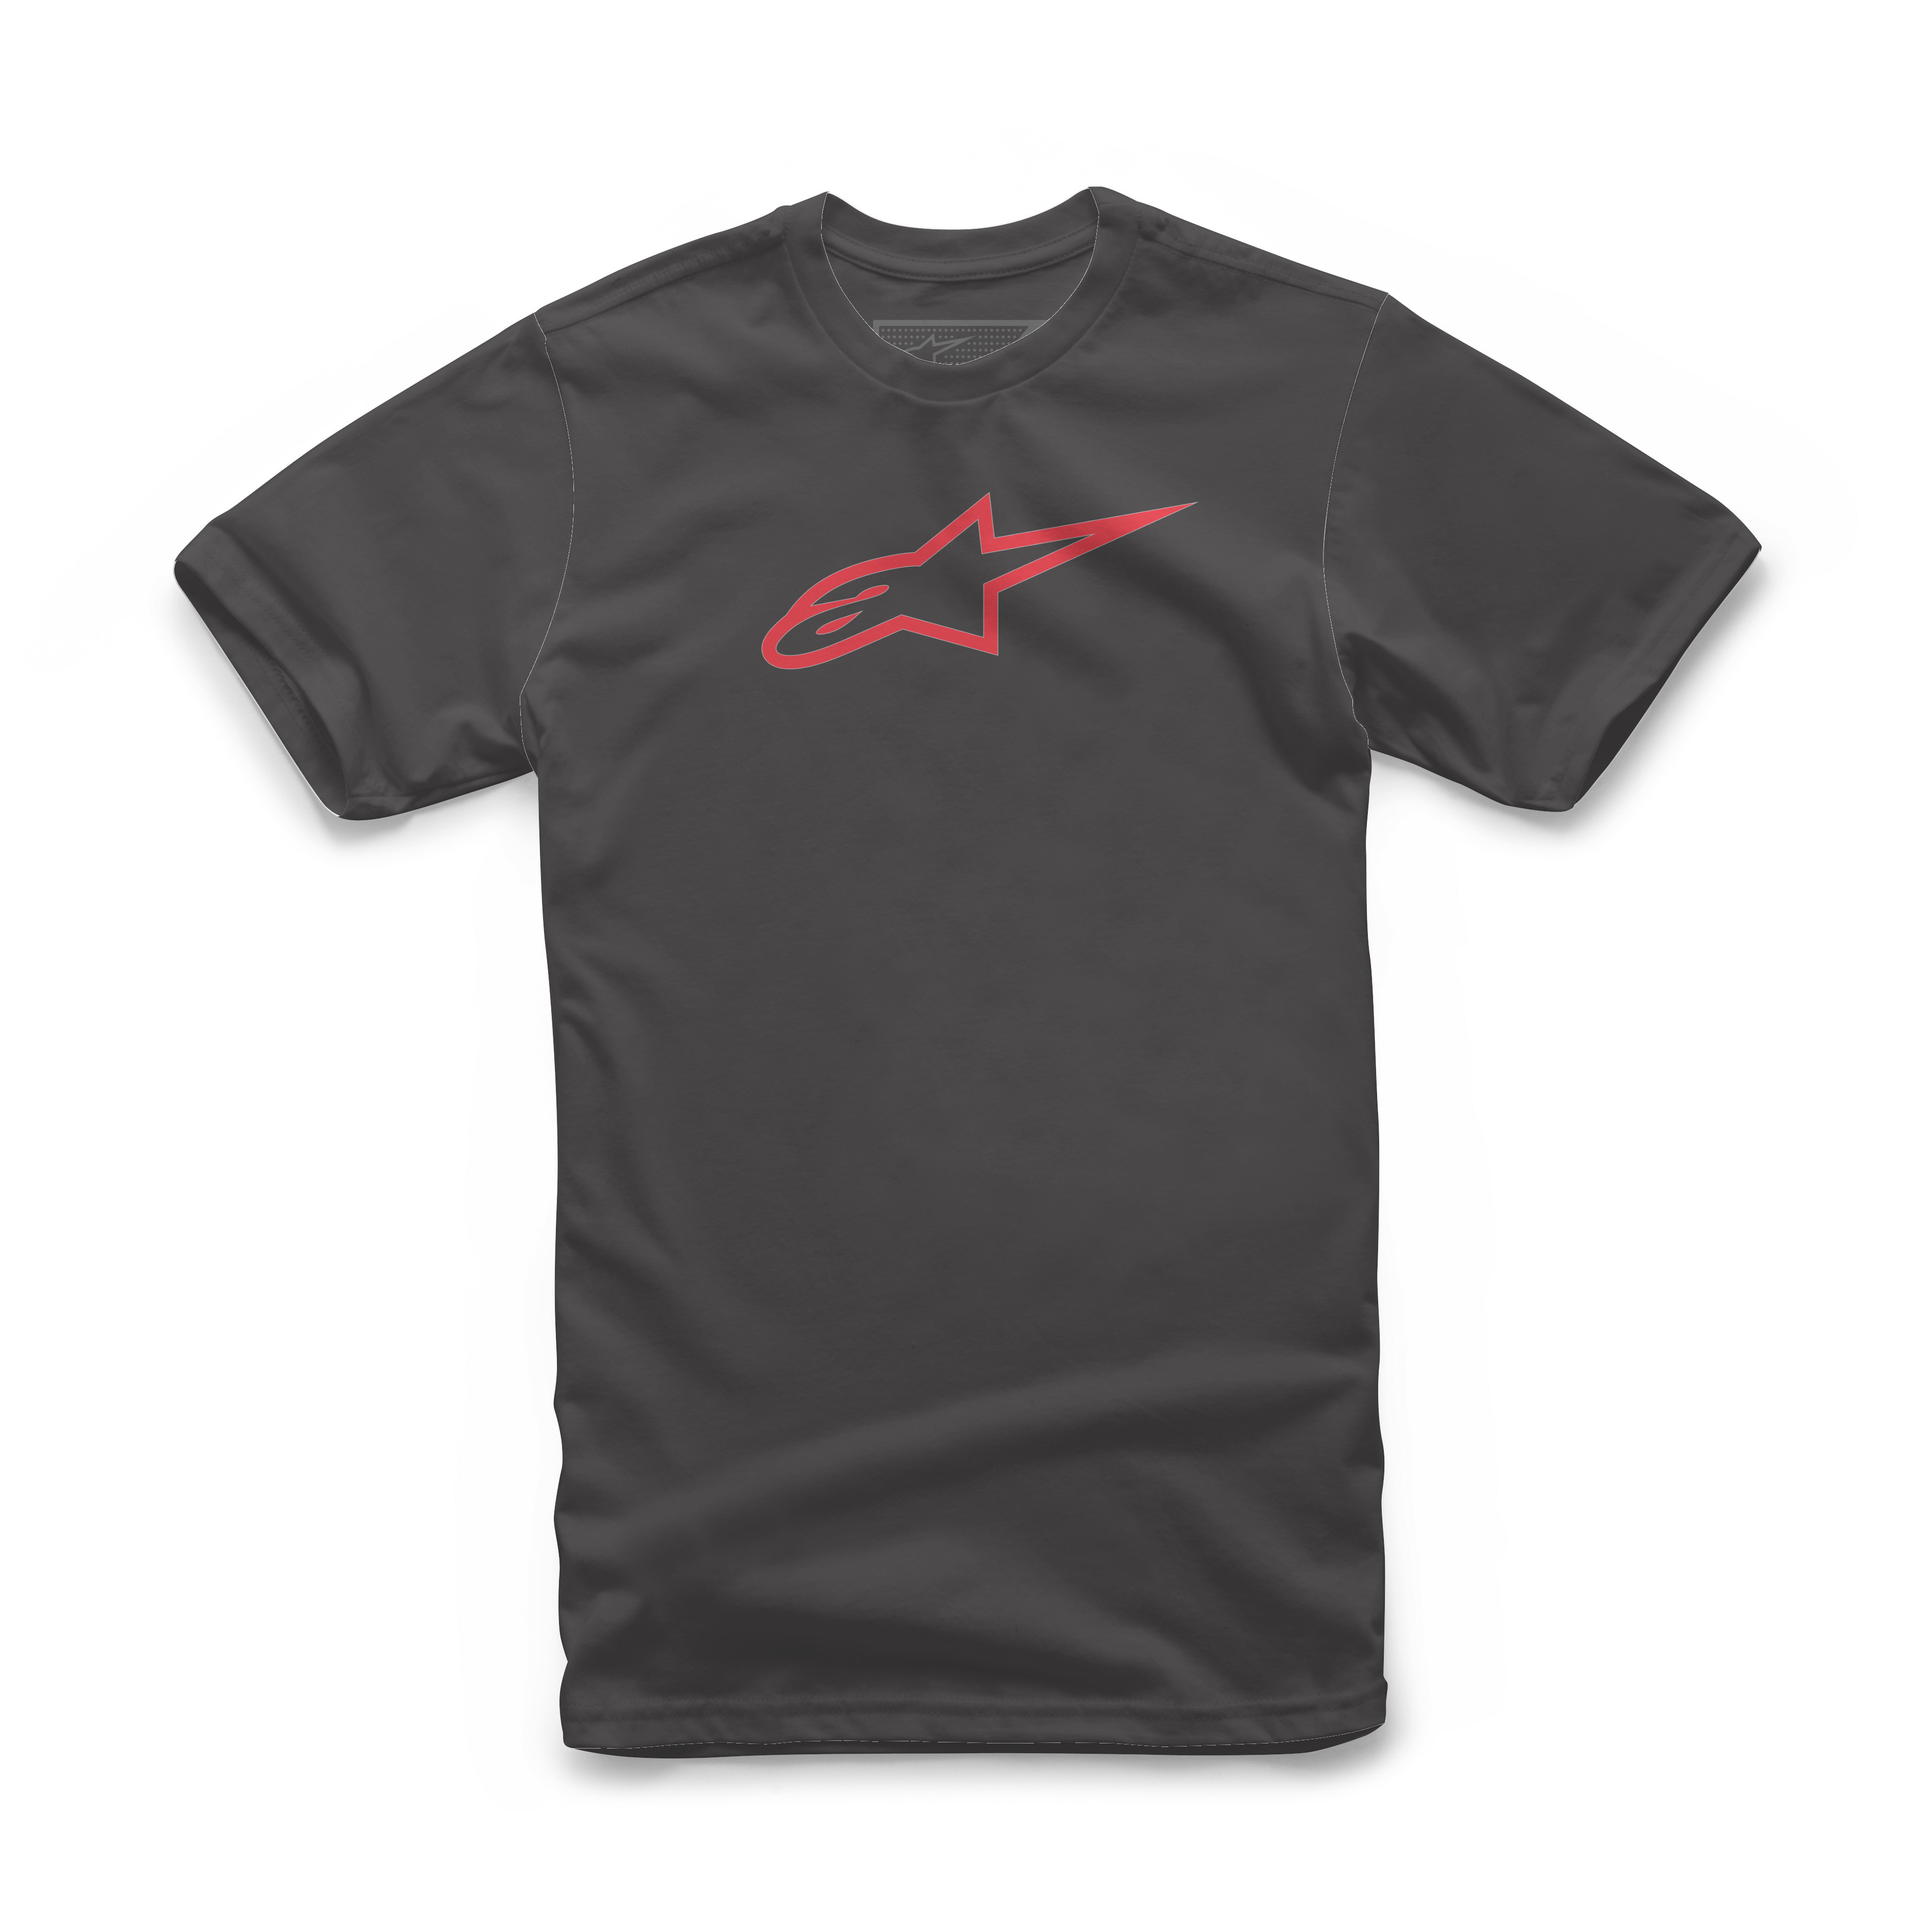 Ageless Tee Black/Red X-Large - Click Image to Close